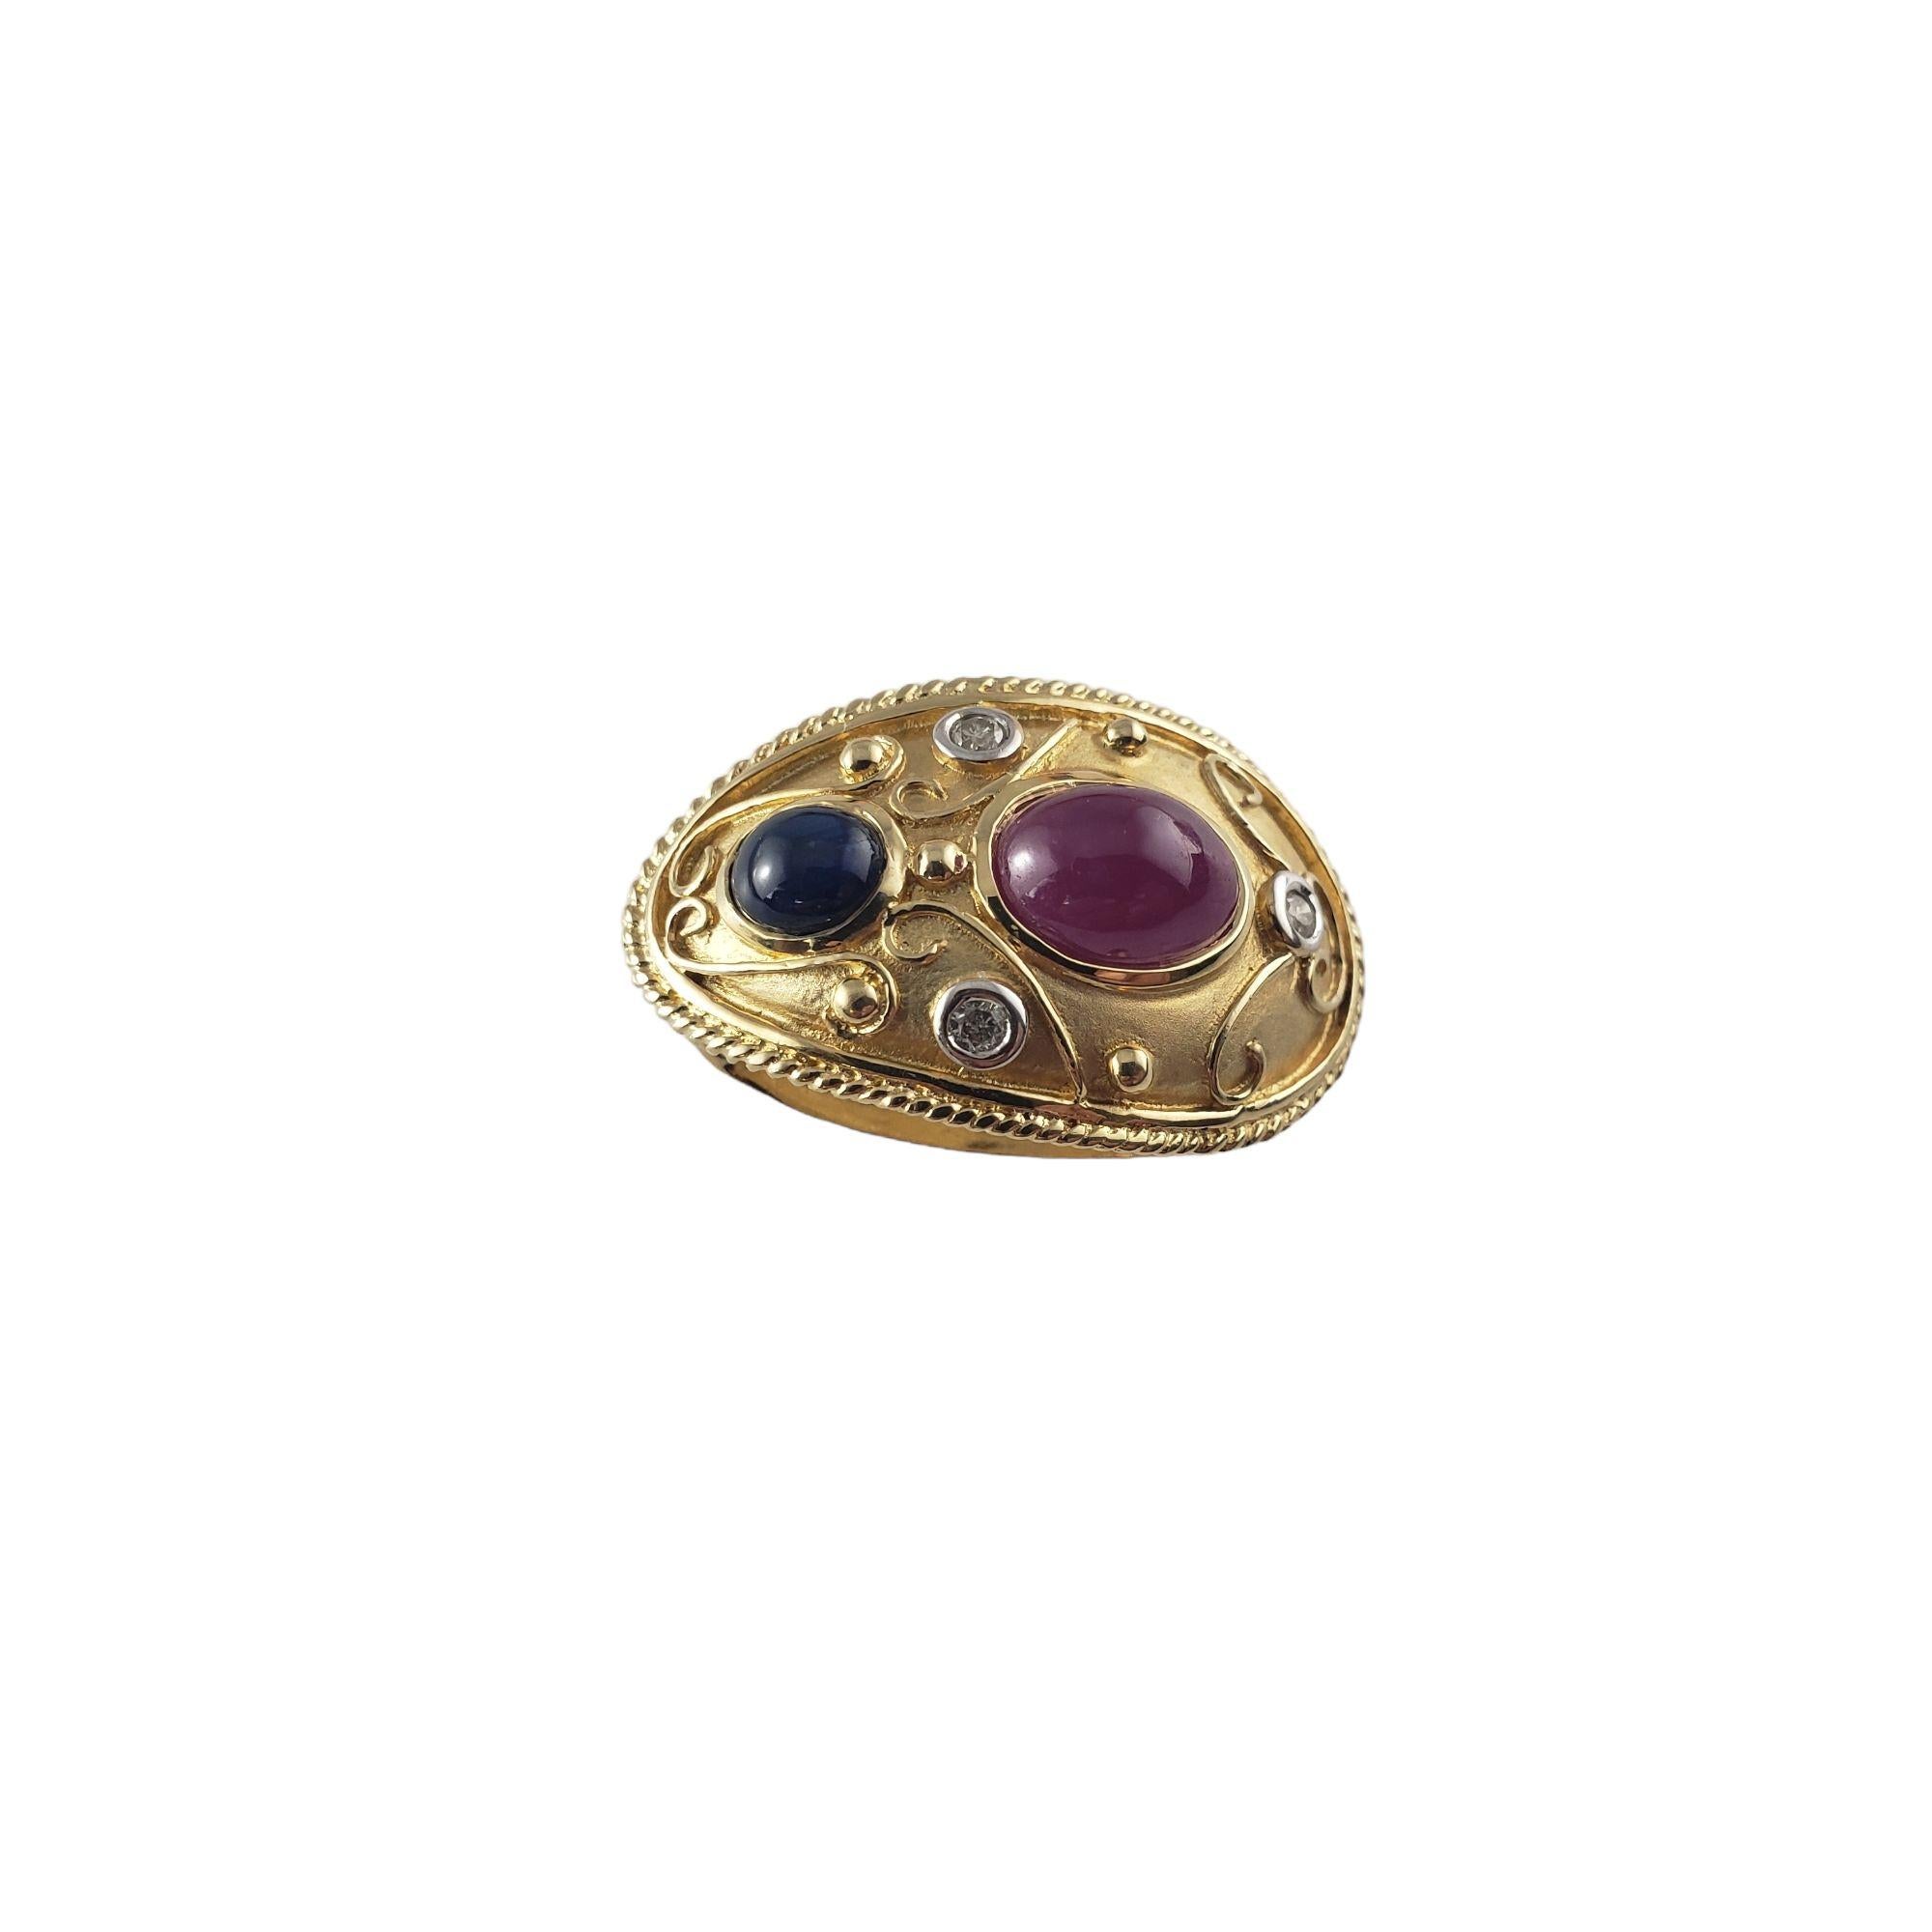 Vintage 14 Karat Yellow Gold Ruby, Sapphire and Diamond Slide Pendant-

This stunning slide pendant features one oval cabochon ruby (7.8 mm x 5.8 mm), one oval cabochon sapphire (5 mm x 4 mm) and three round brilliant cut diamonds set in beautifully